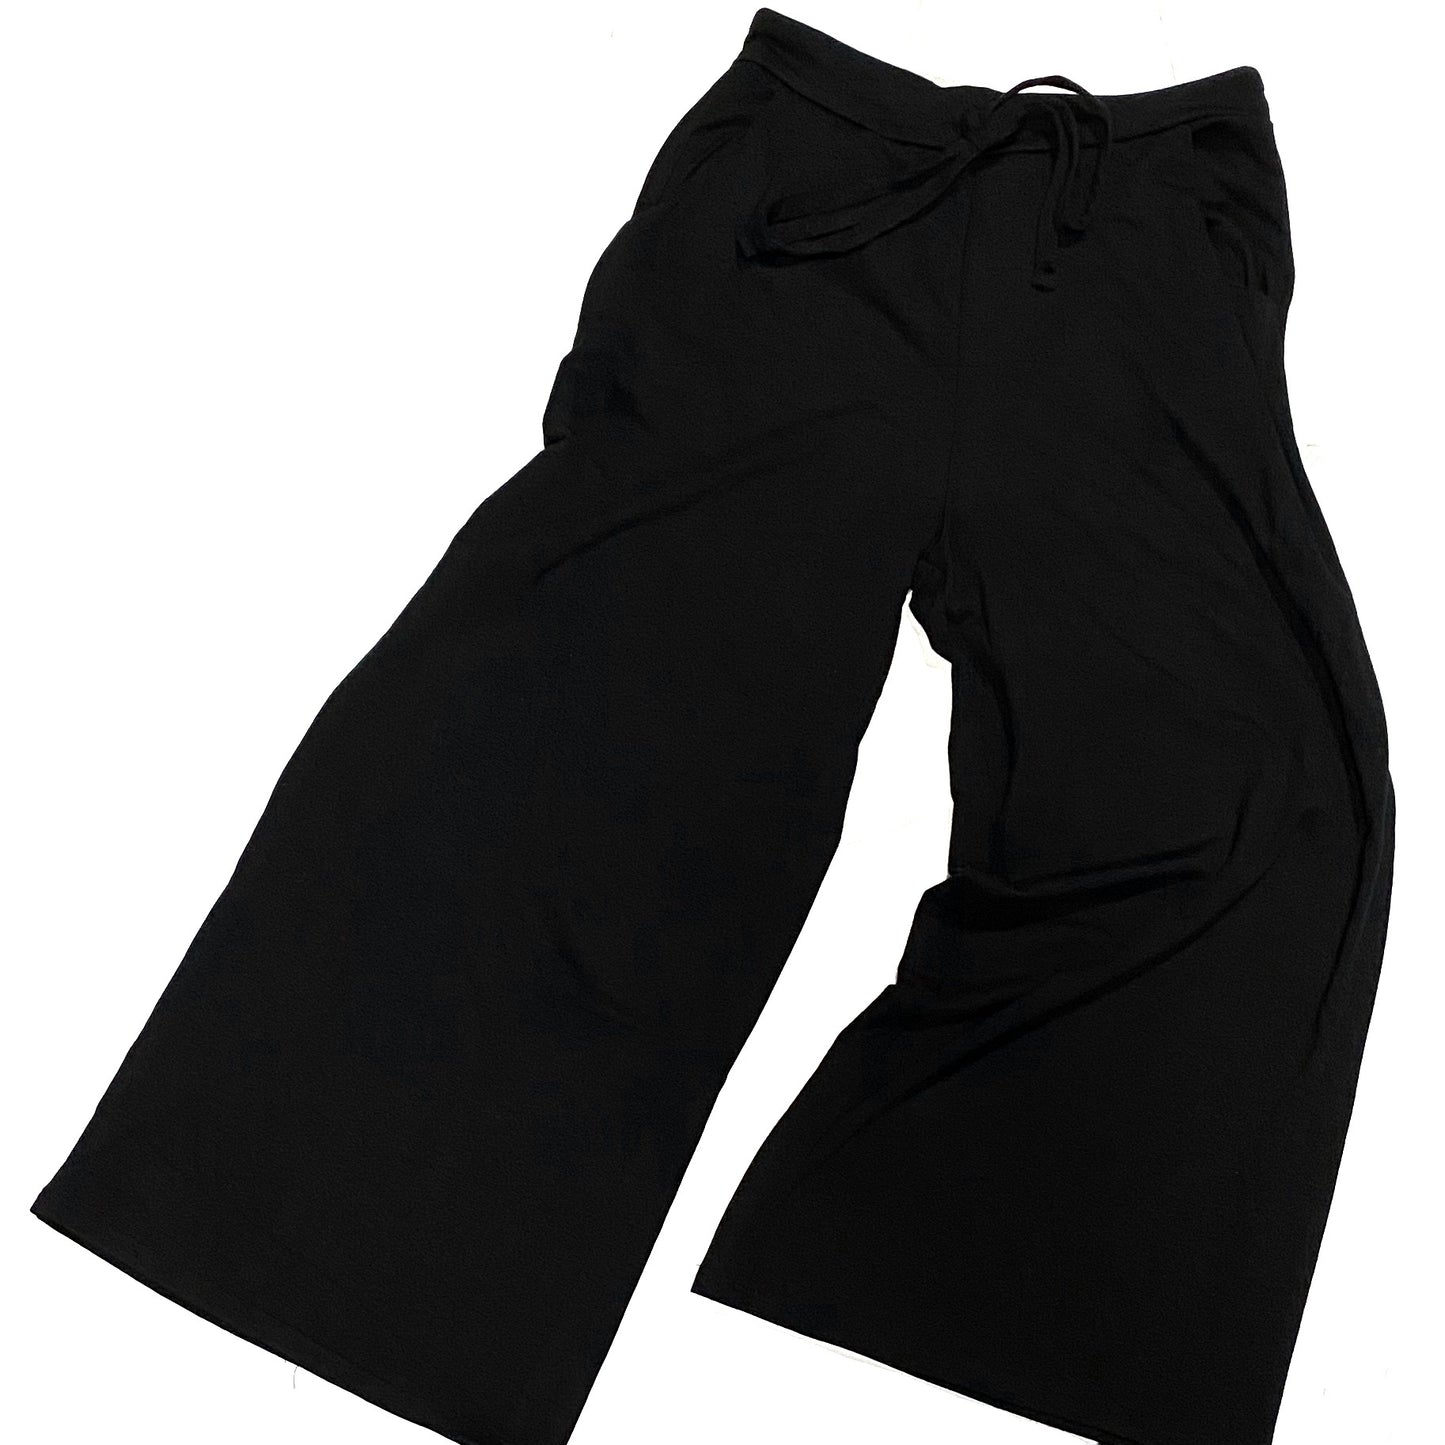 Solid Black Palazzo Pants with Pockets